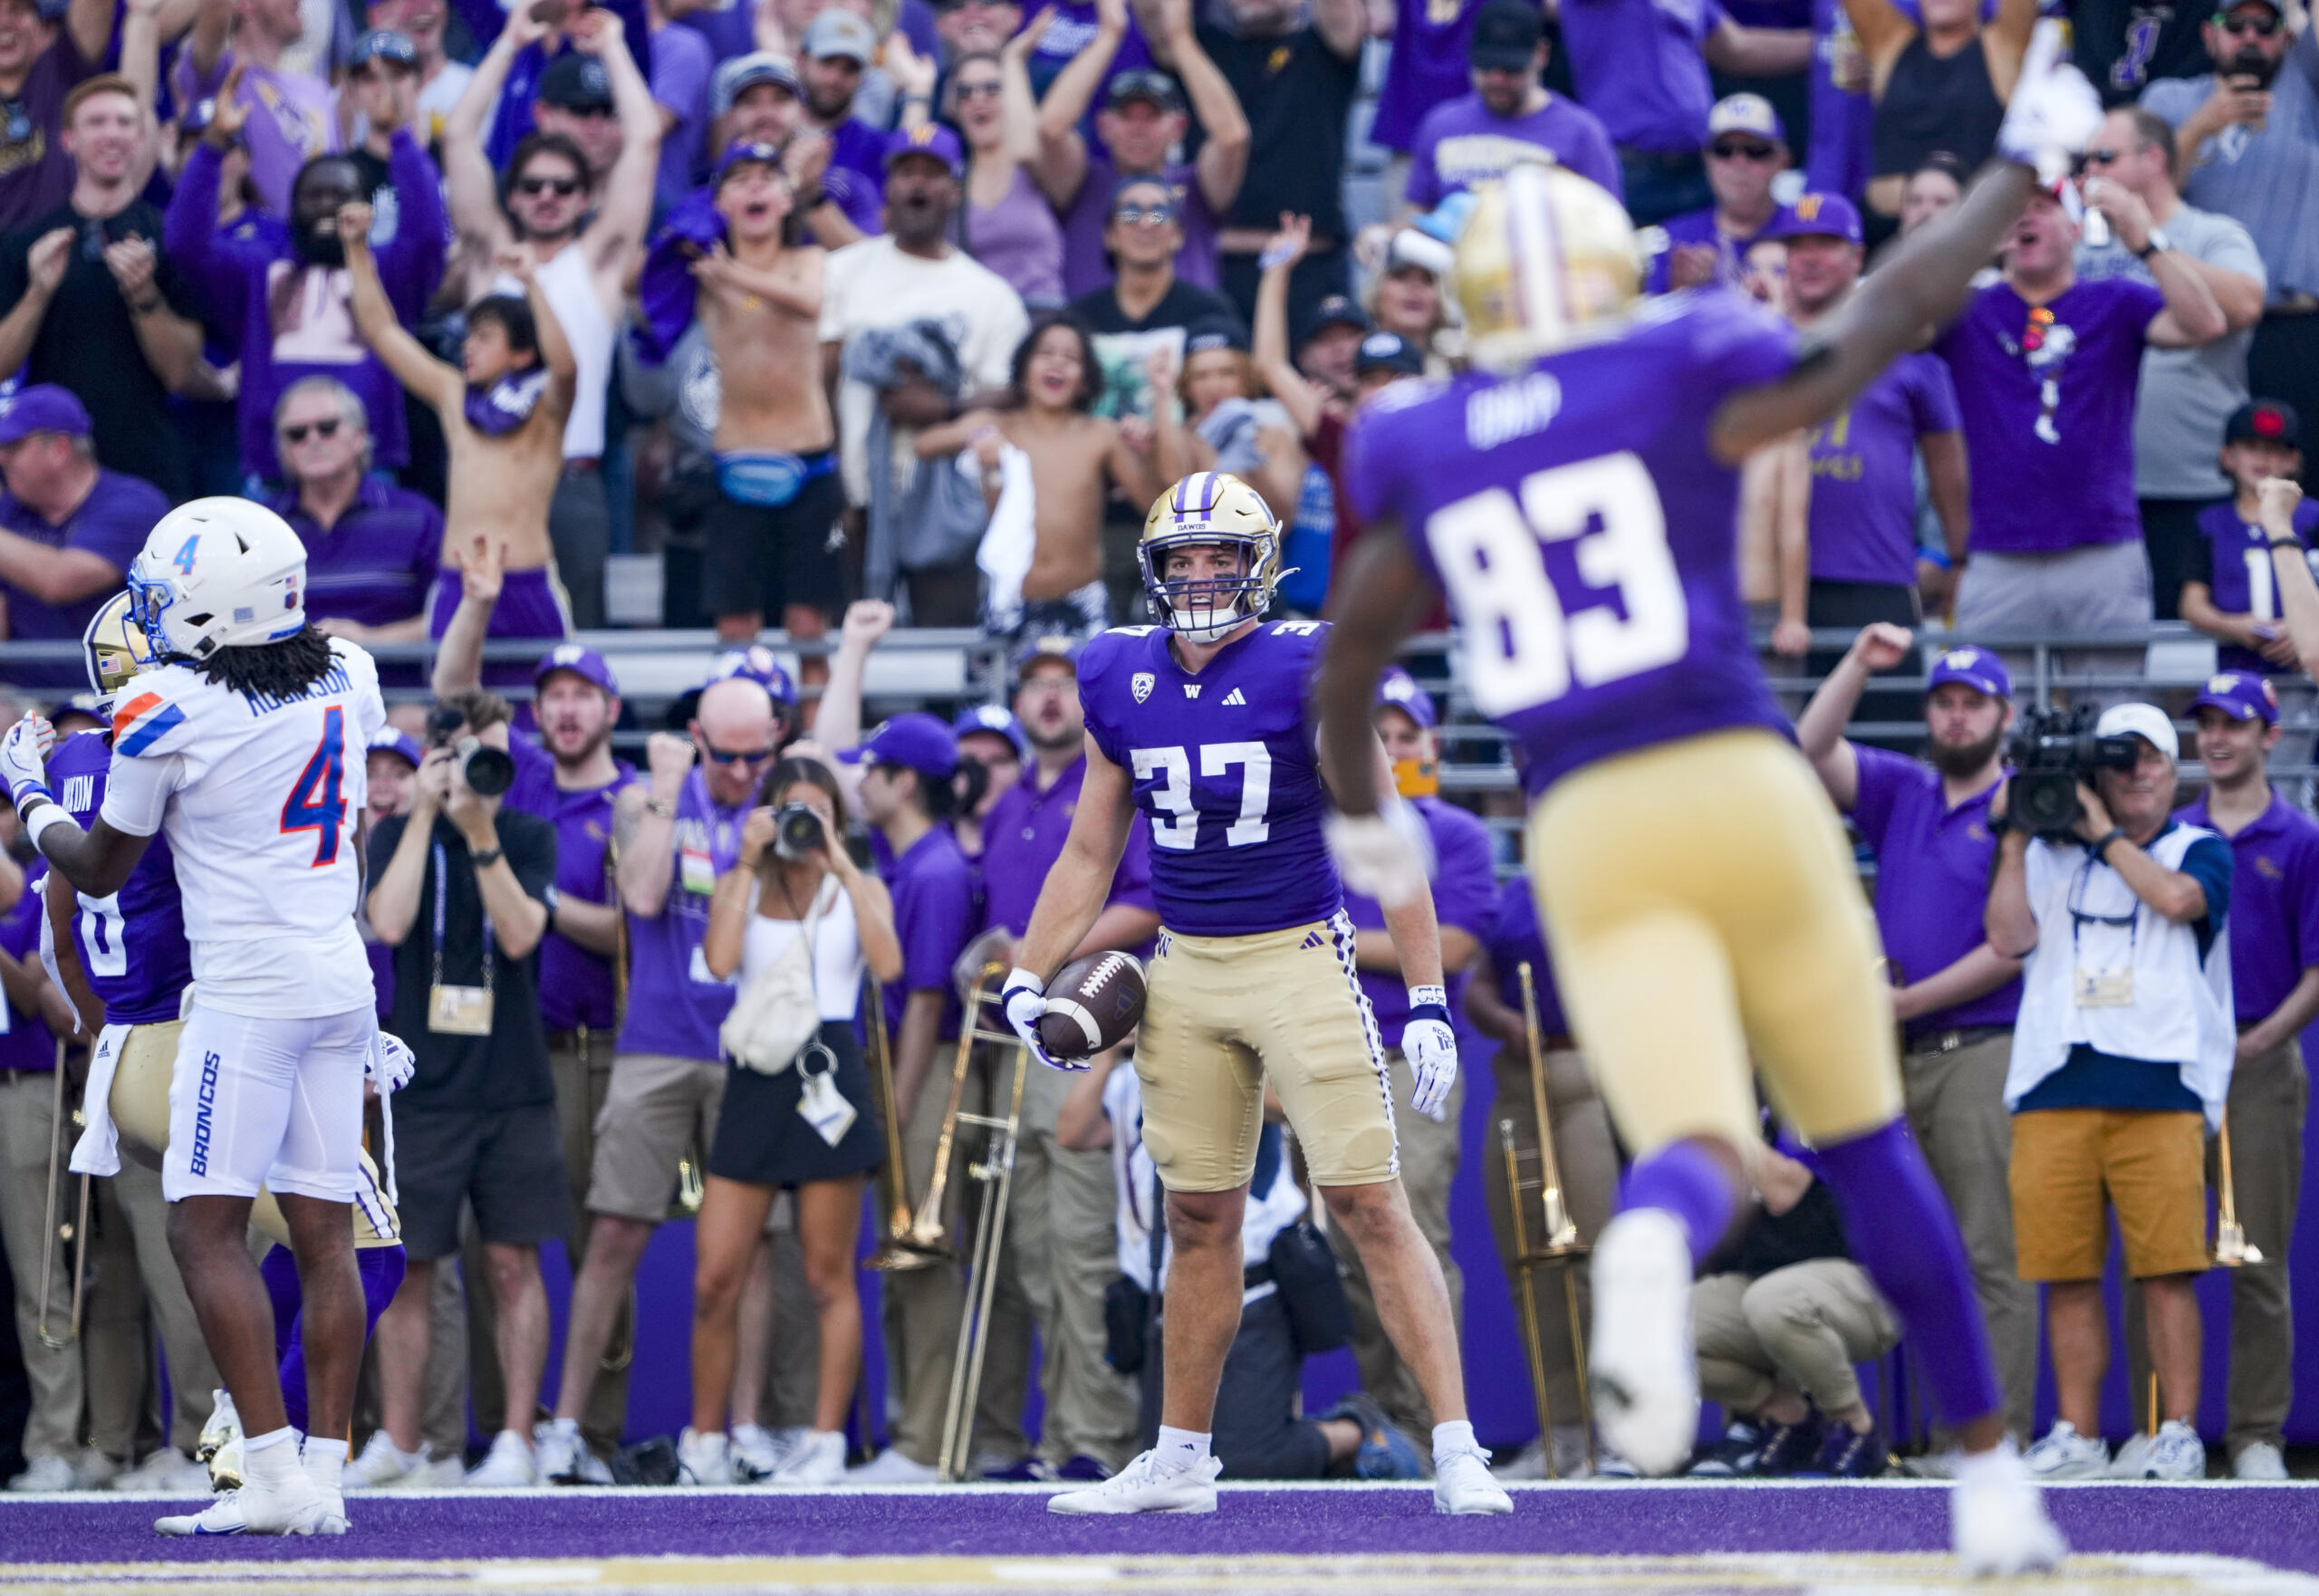 Washington tight end Jack Westover reacts after scoring a touchdown against Boise State safety Rodney Robinson (4) during the first half of an NCAA college football game, Saturday, Sept. 2, 2023, in Seattle.